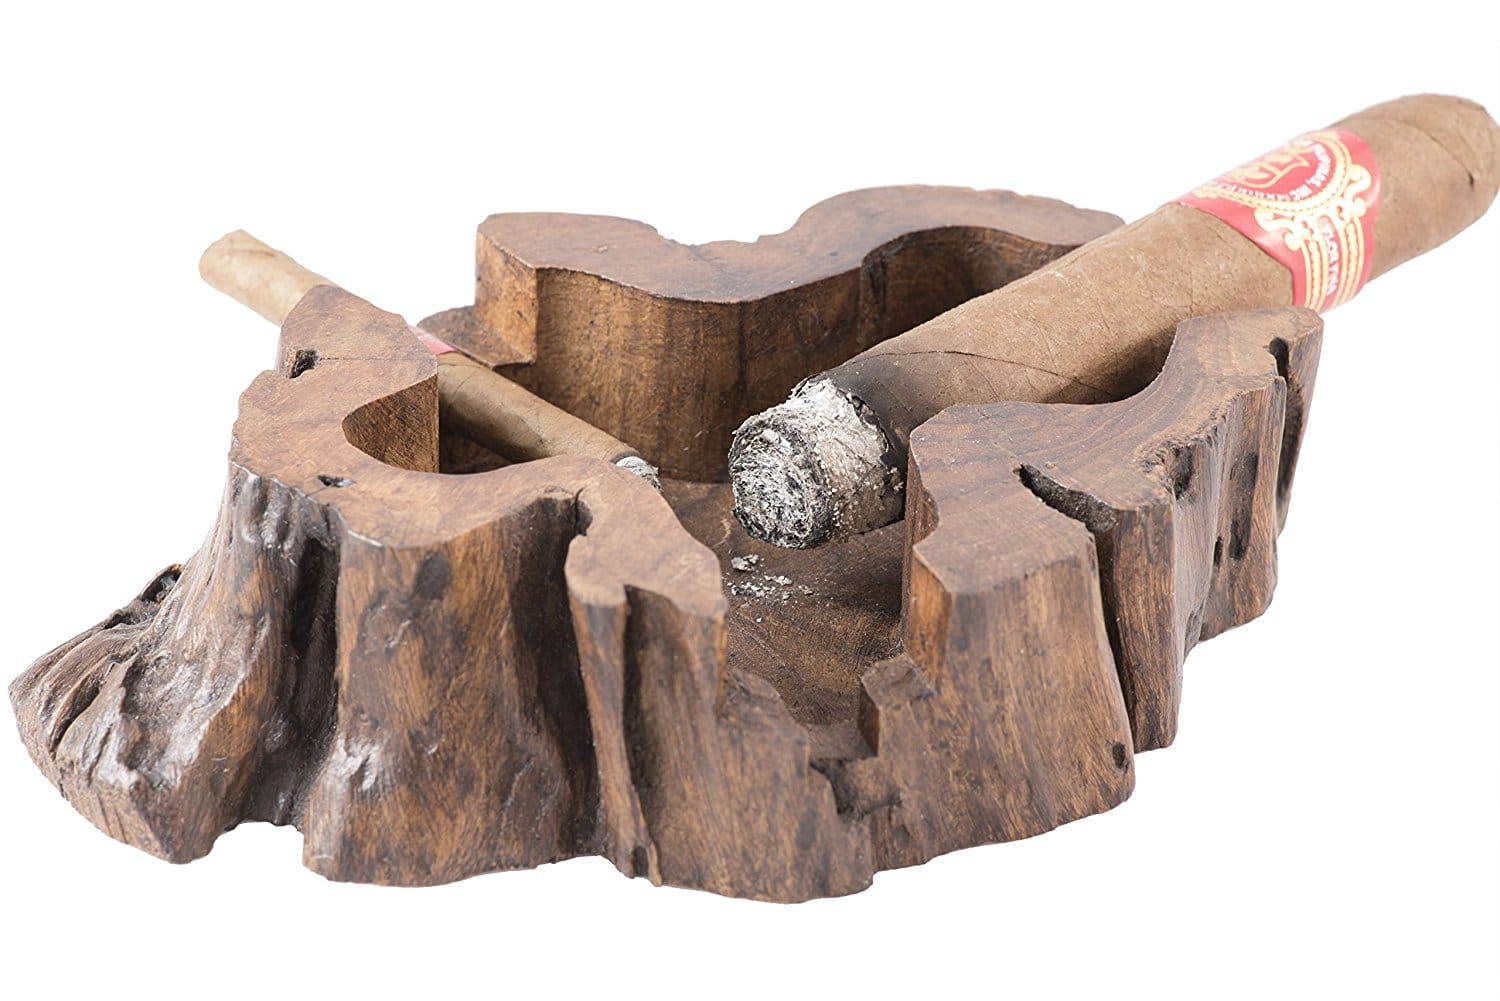 9 Best Cigar Ashtrays To Have A Smoke And Dust Off Those Stogies